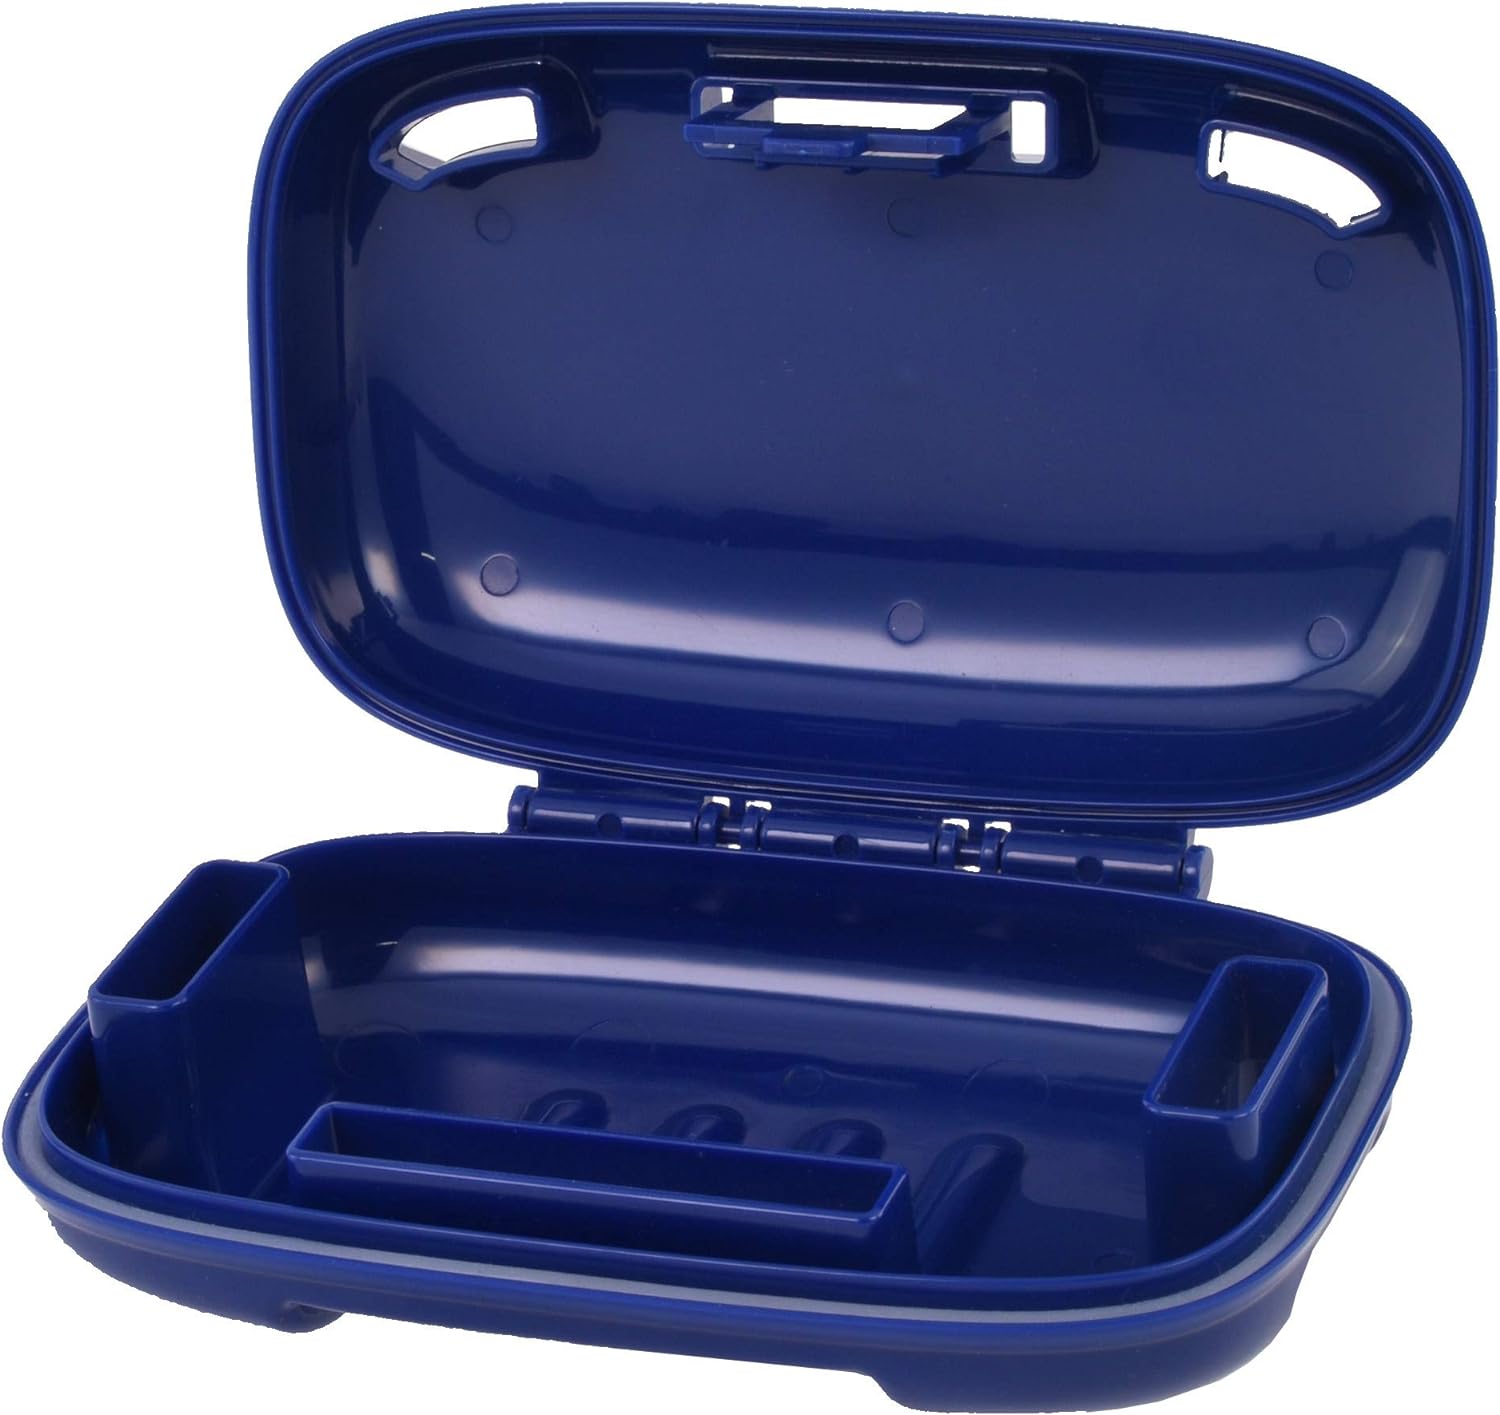 PORTINEER Carry-Dri MAX Bar Soap Holder Box Container - Case Vents Dries Bar And Doesn't Leak - Travel Dish For Home School Gym Travel Hiking - Patented Container Design - Blue